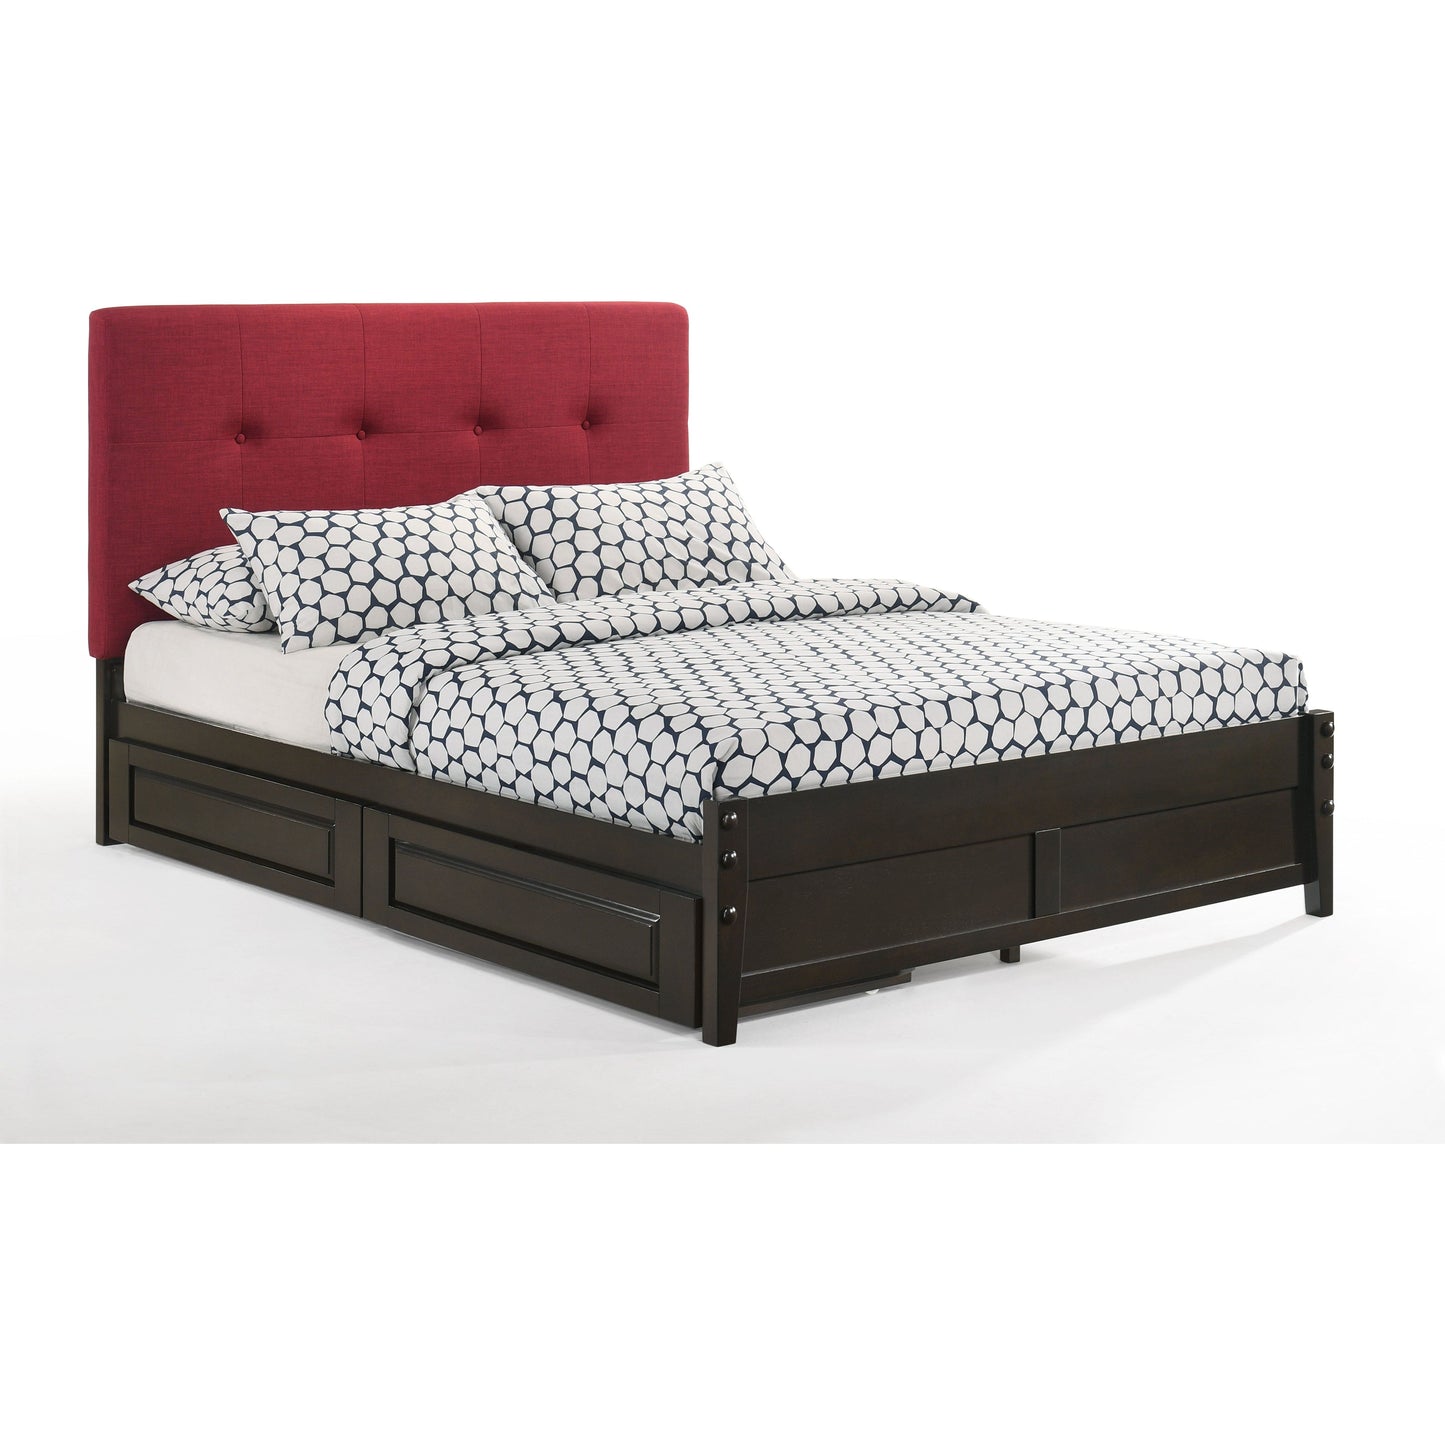 Night and Day Paprika Full Bed in Charcoal with Chocolate Finish Frame (K Series)